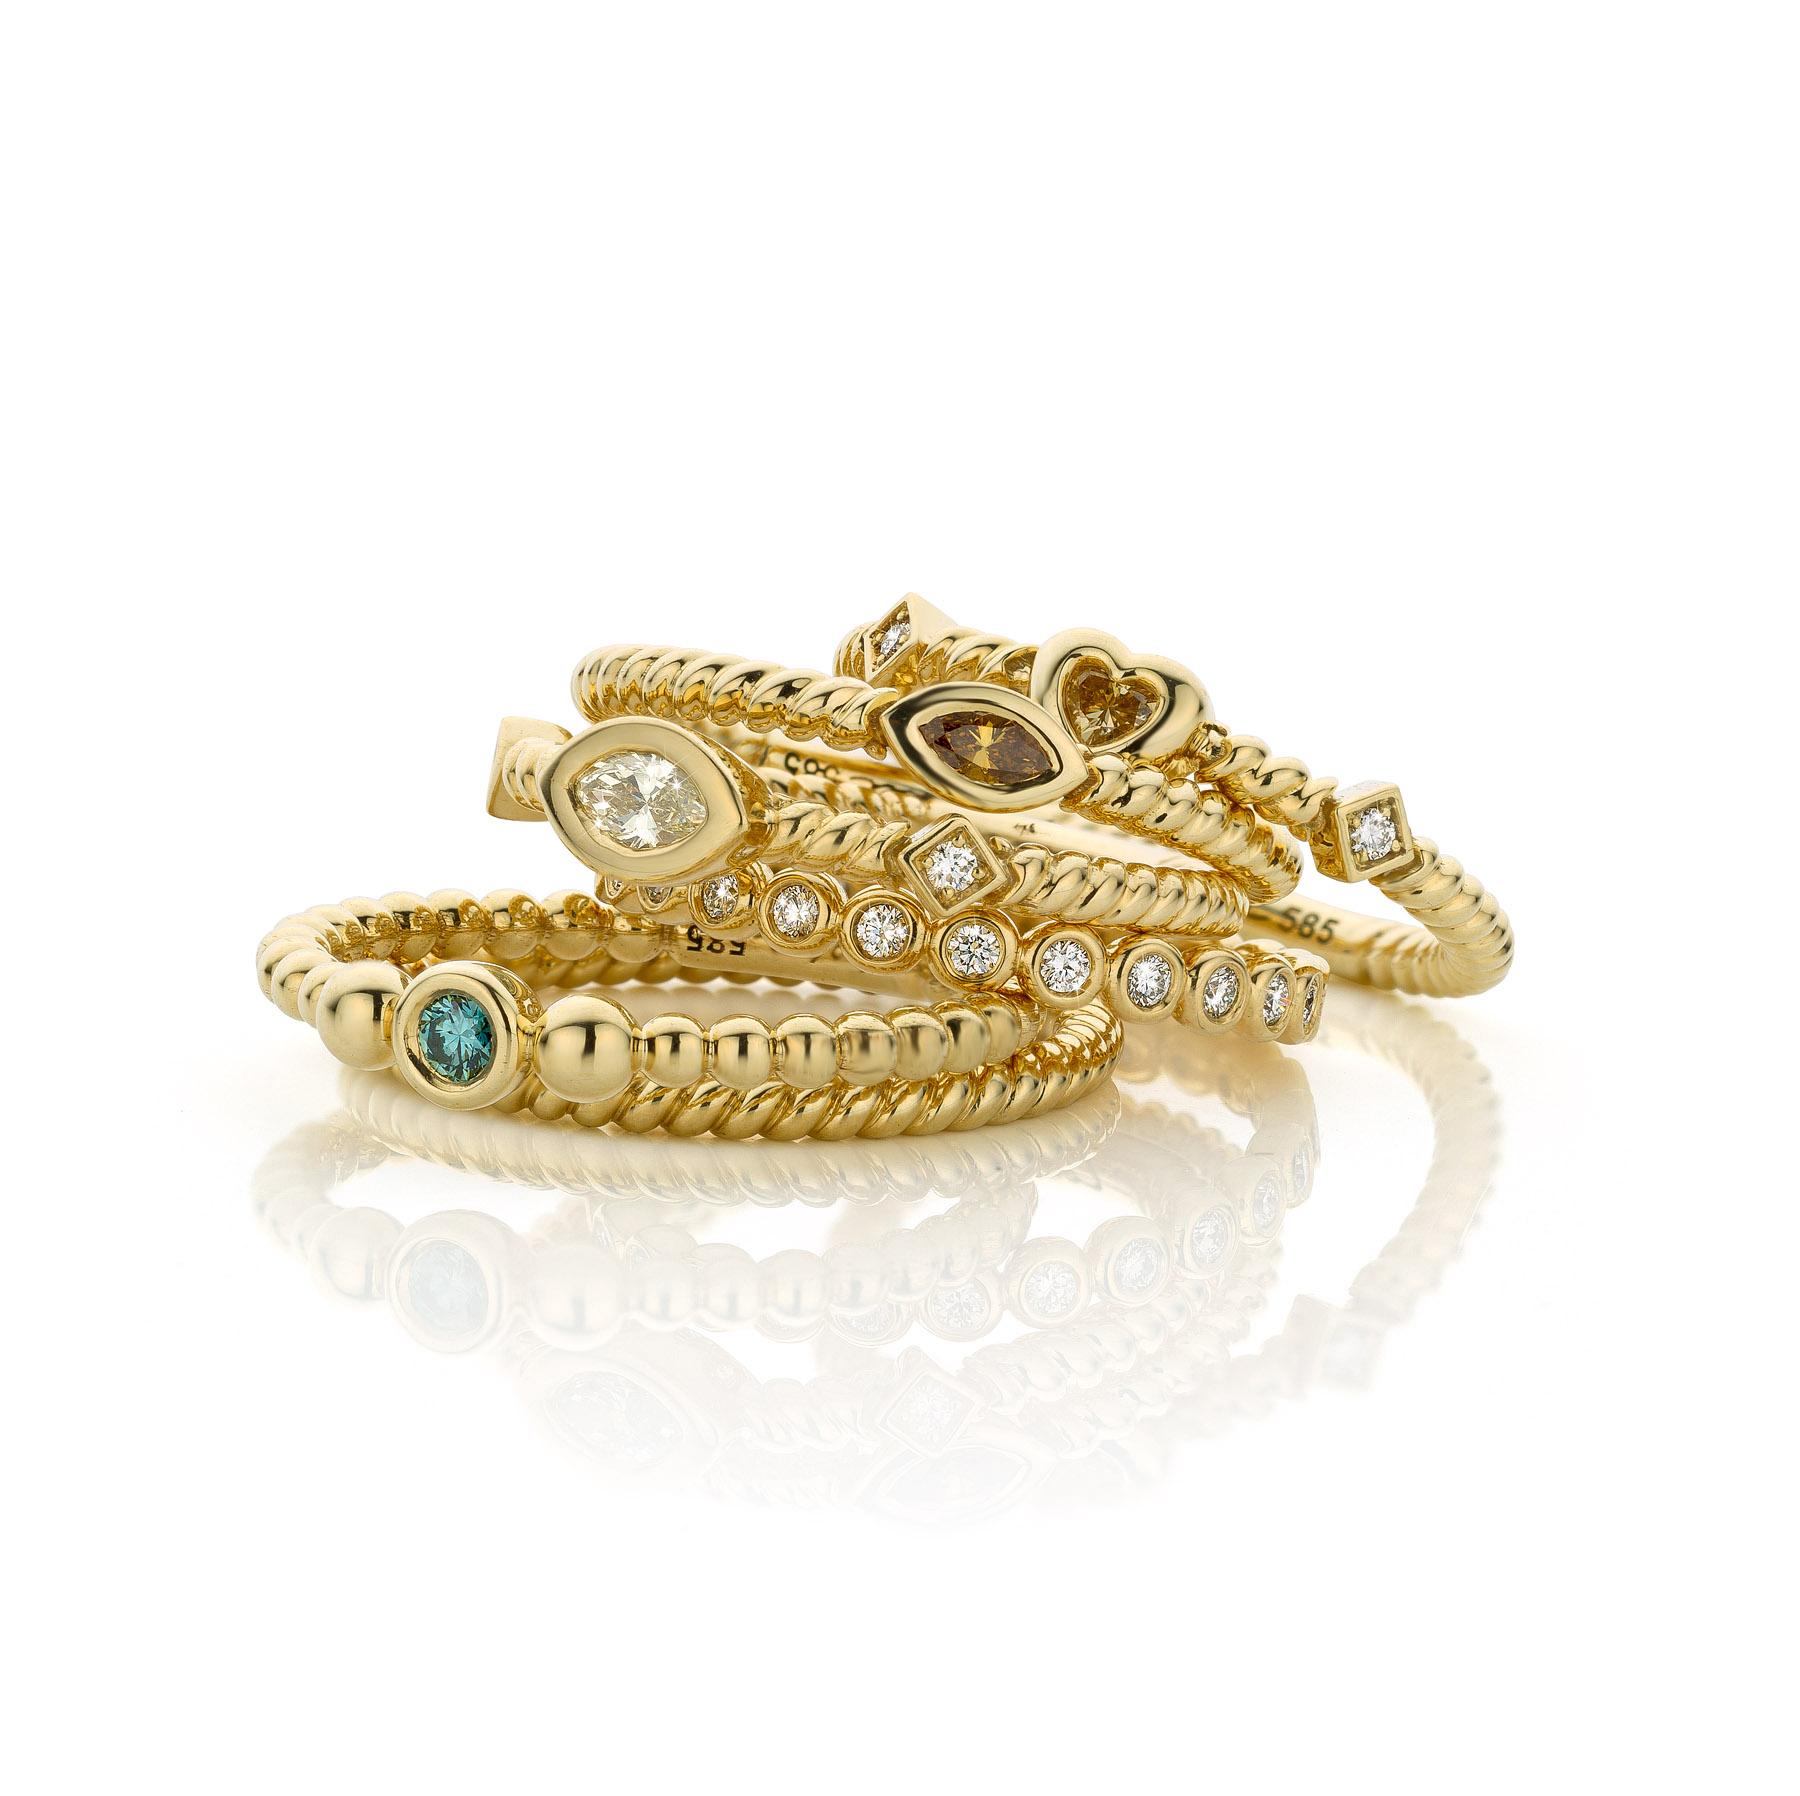 For Sale:  Cober Ibiza “Butterfly” set with Diamonds Made of 14 Carat fairtrade Gold Ring 4